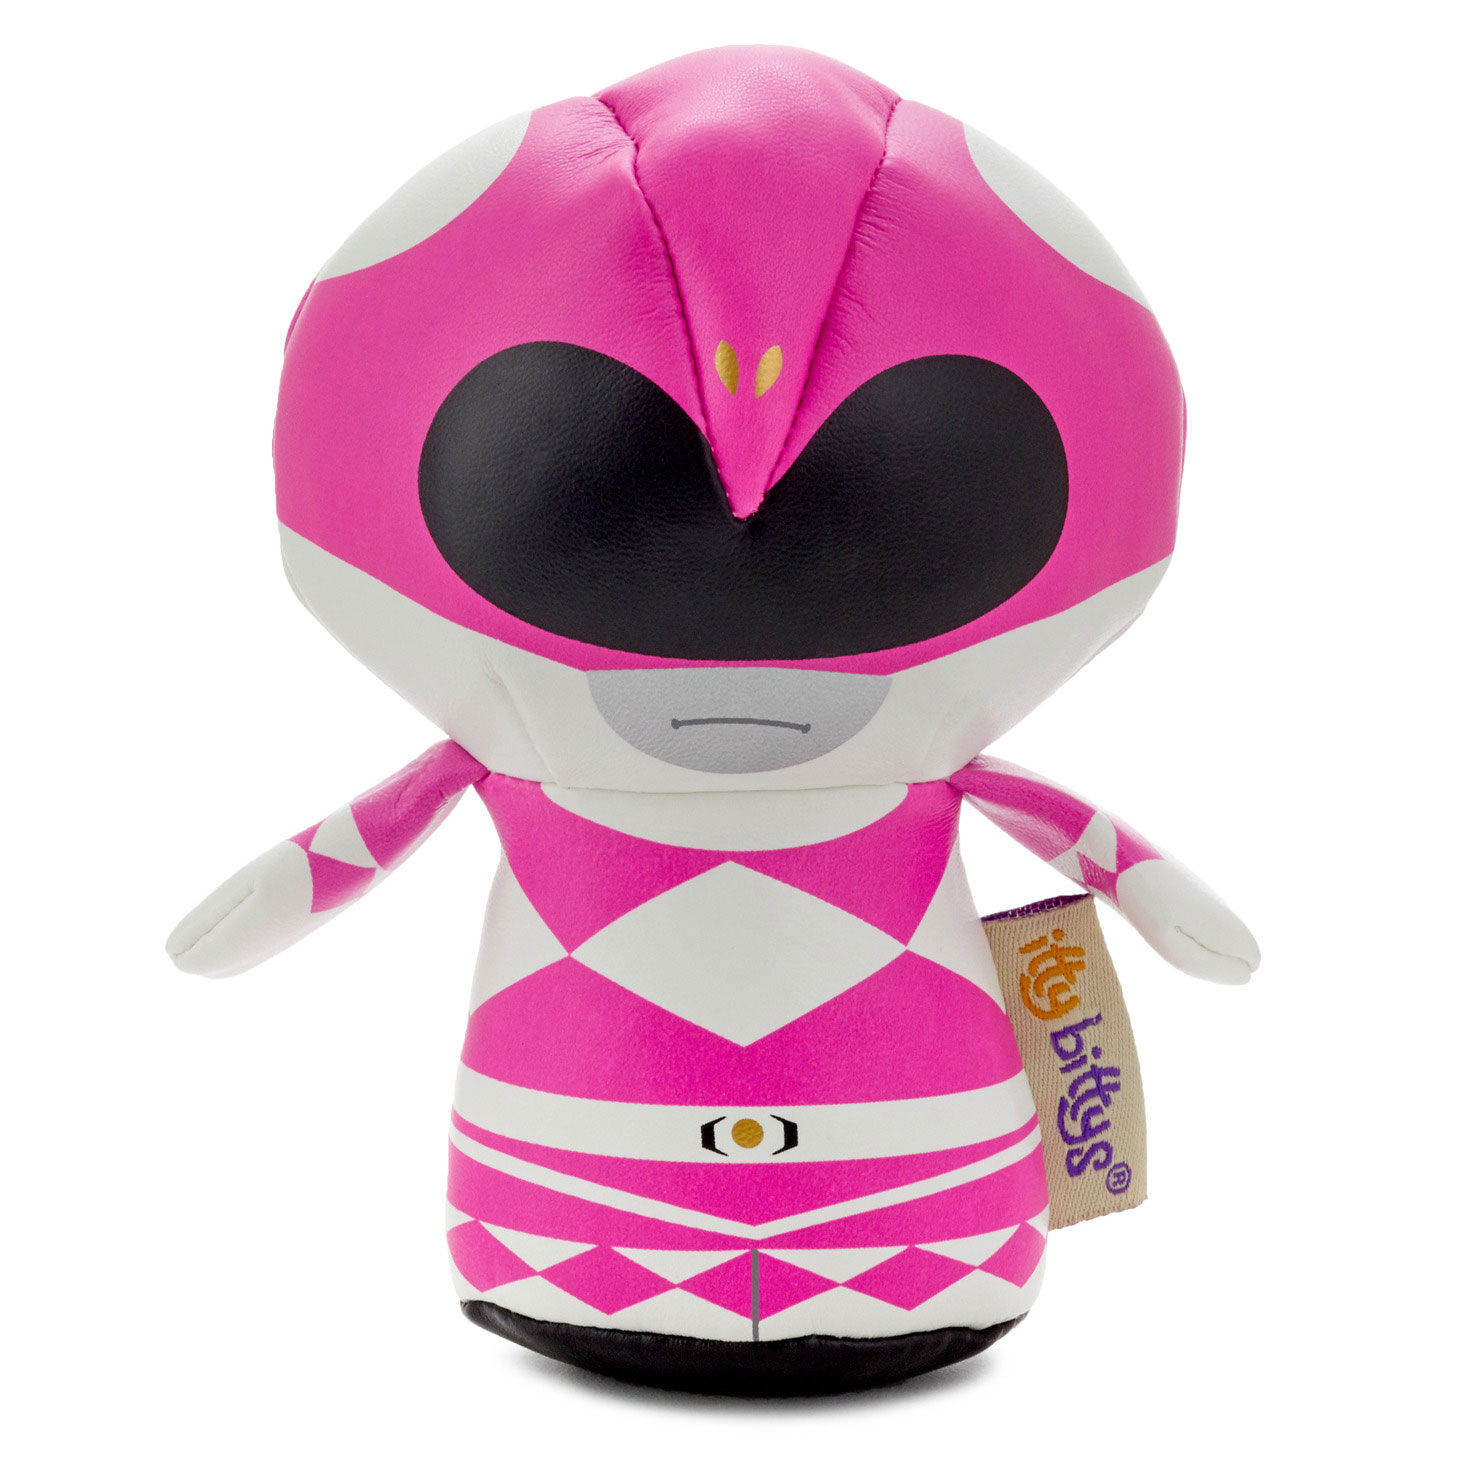 Lounge Fly custom, limited edition Mighty Morphin Power Ranger